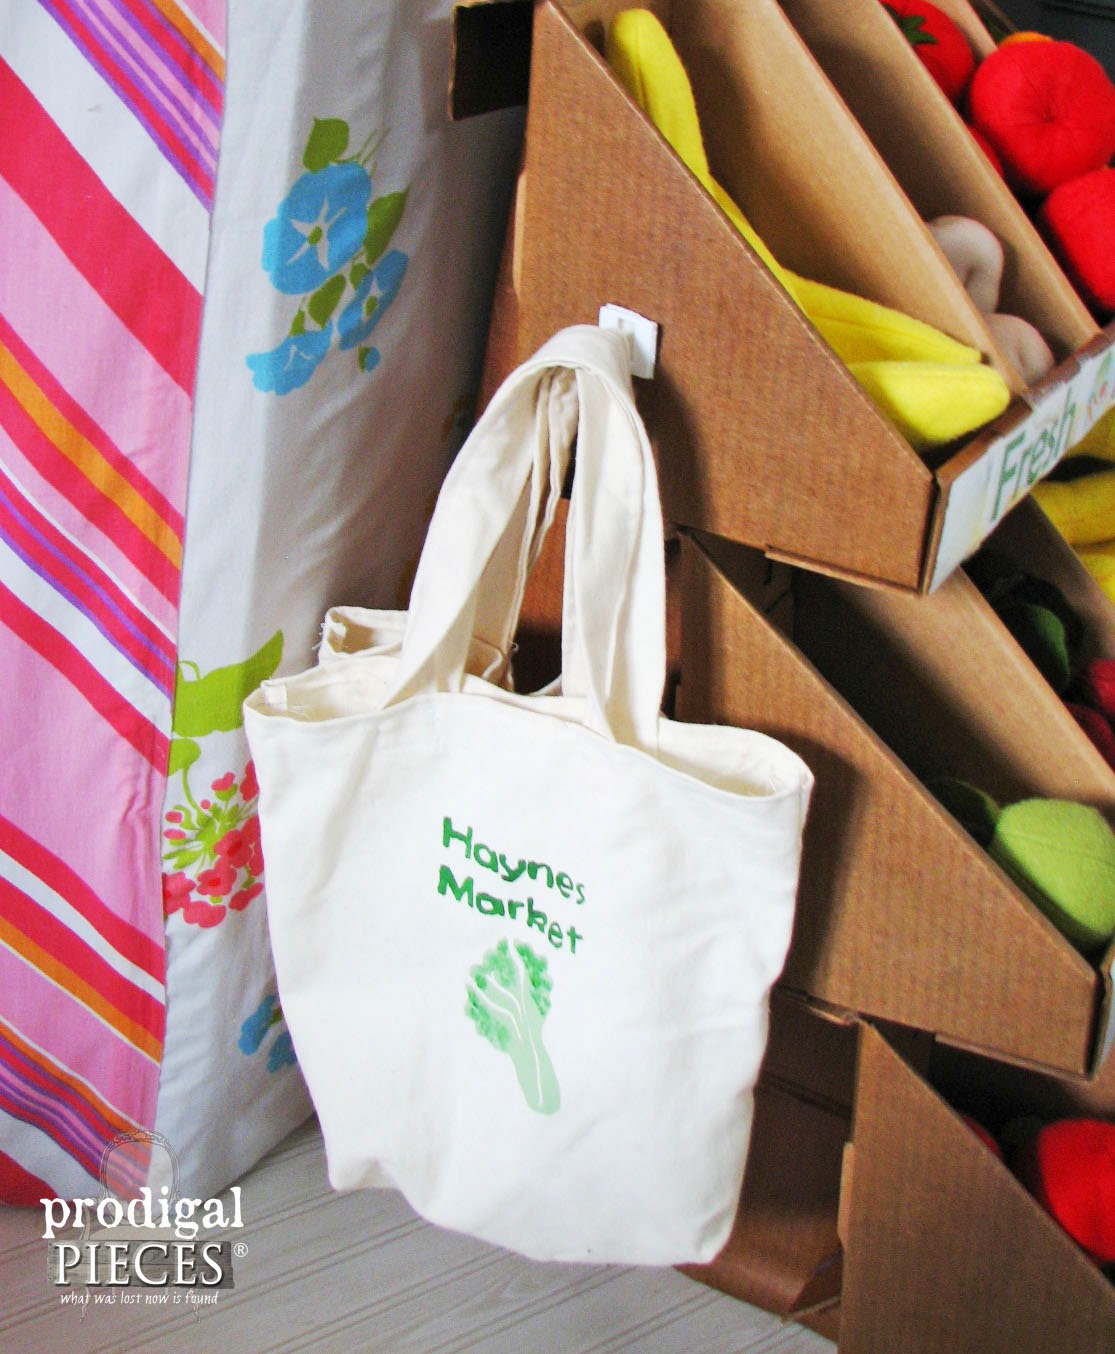 Handmade Market Tote Bags for Pretend Play by Prodigal Pieces | prodigalpieces.com #prodigalpieces